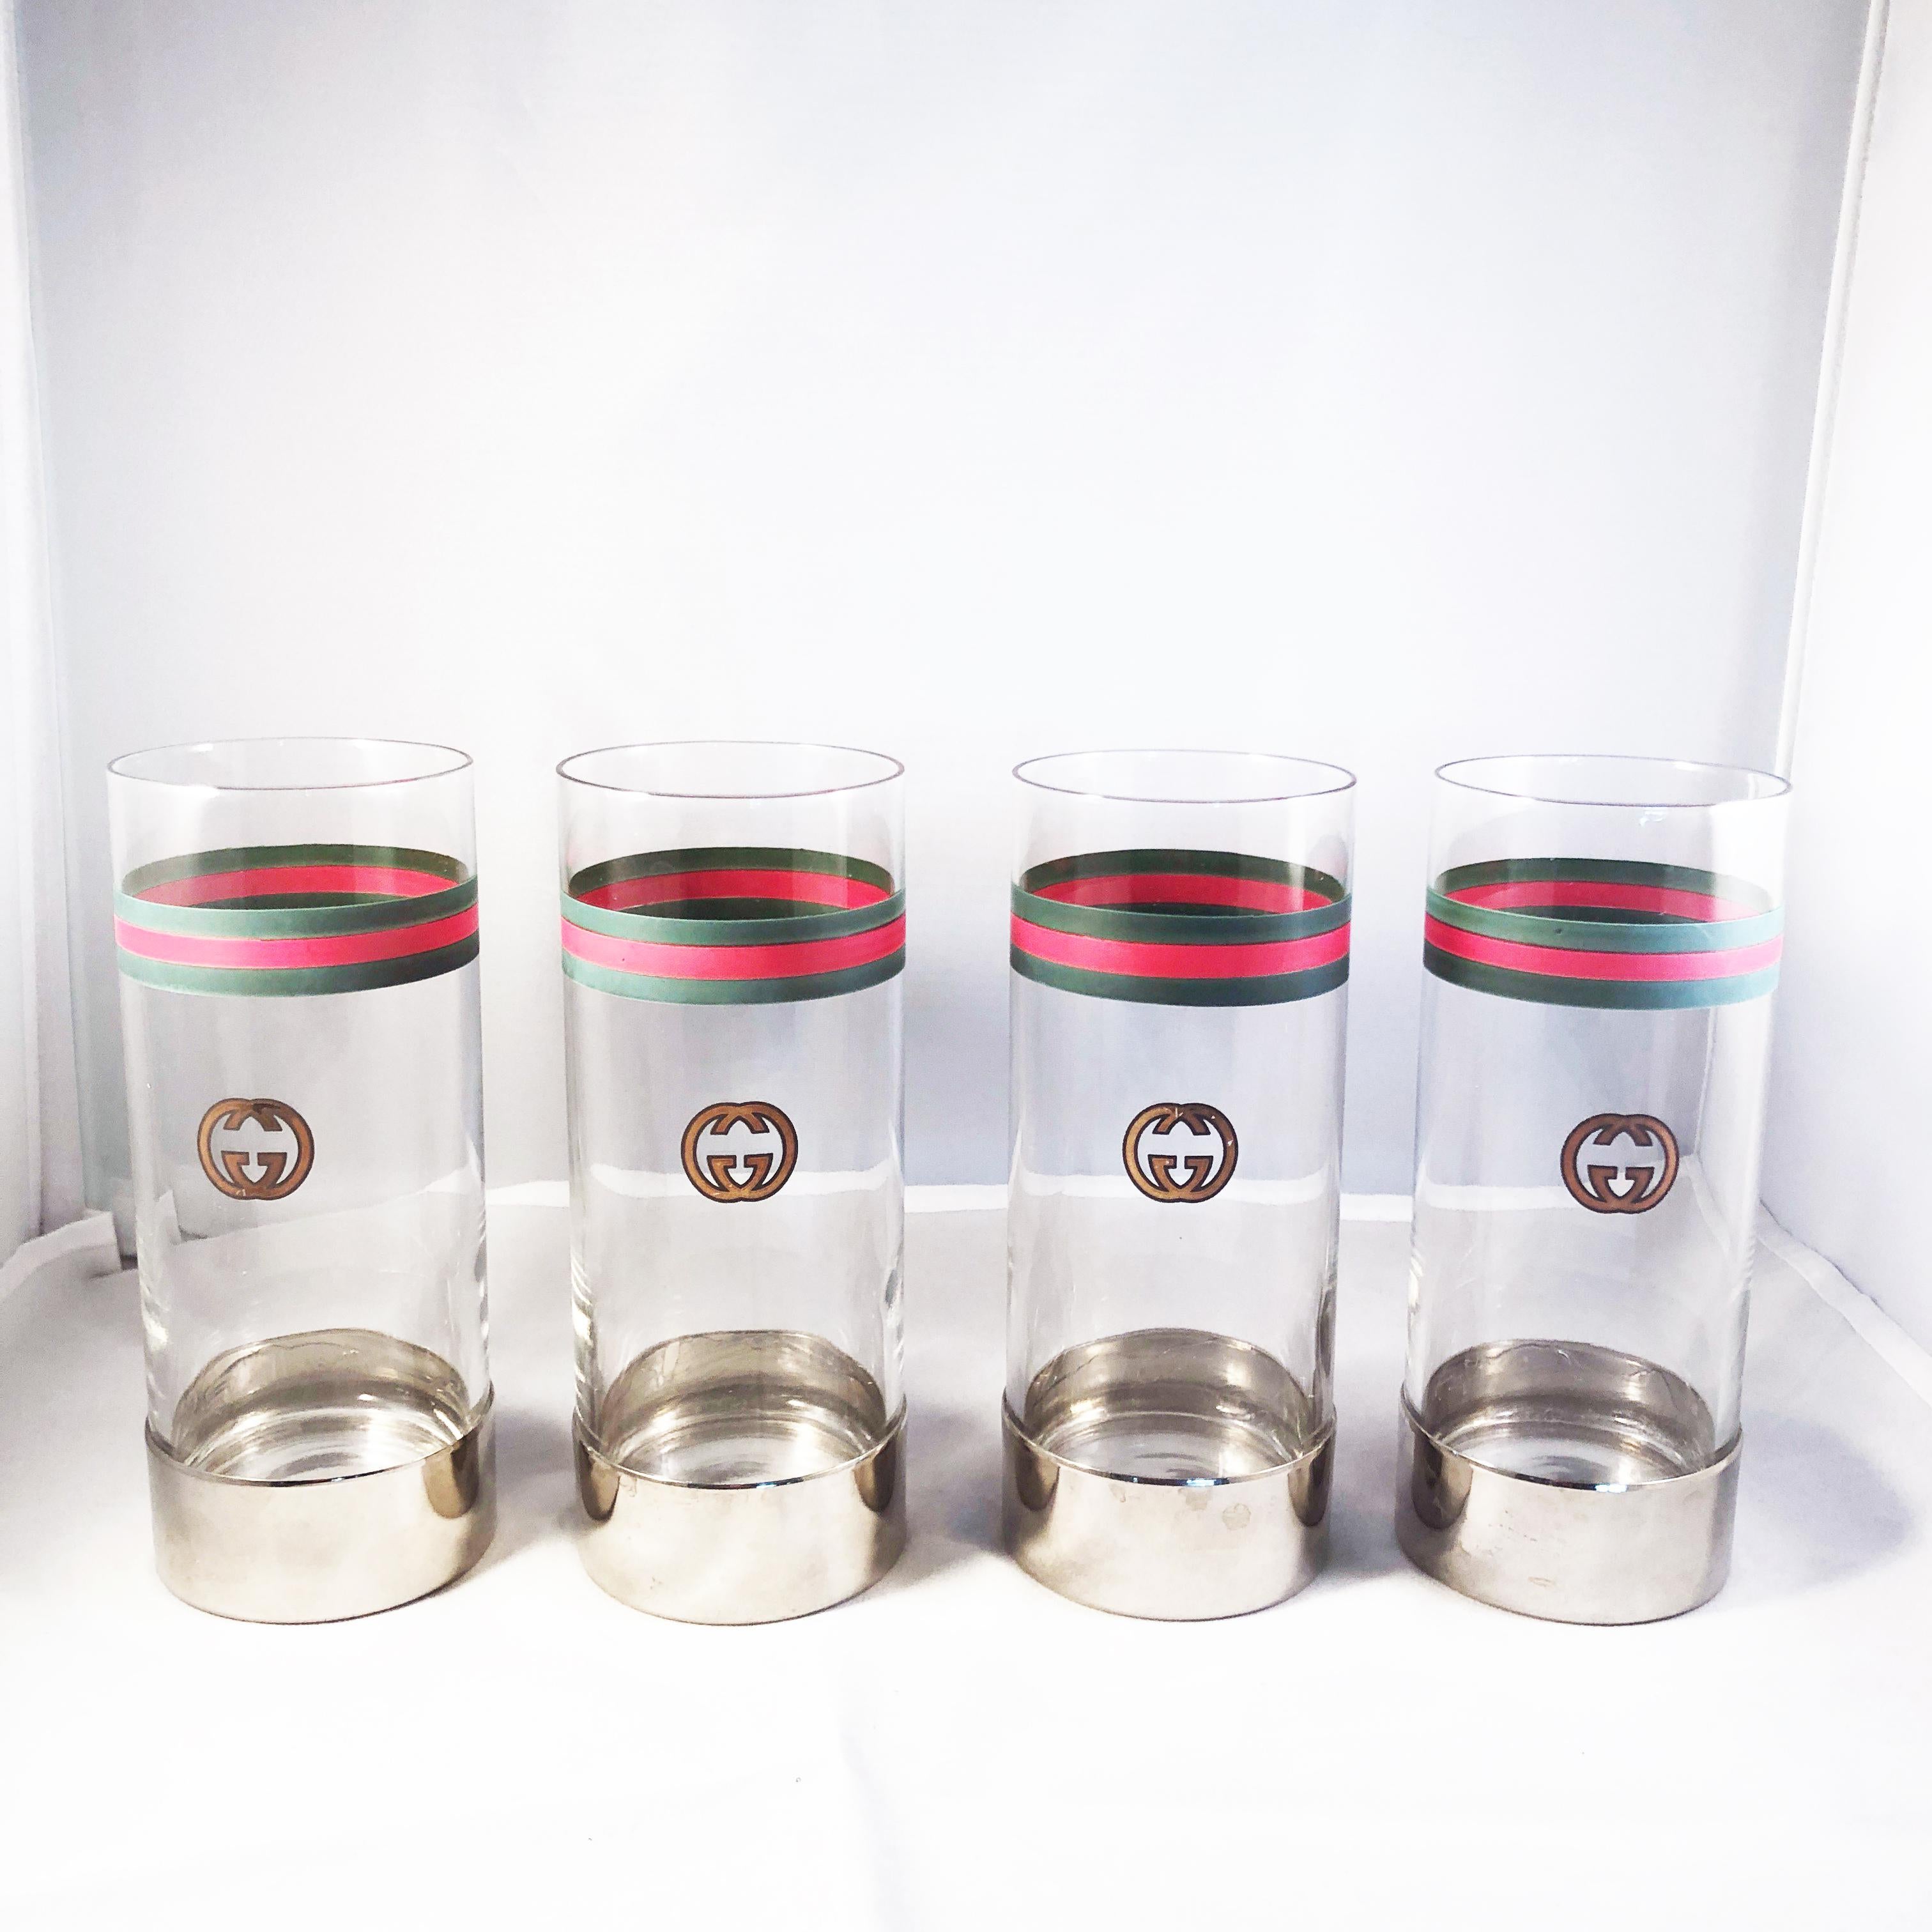 Celebrate in style with this set of 4 rare vintage highball glasses by Gucci, likely made in the late 70s.  Each glass is painted with Gucci's signature web and GG logo with a silver metal base.  Preowned/vintage with some signs of use & wear: some